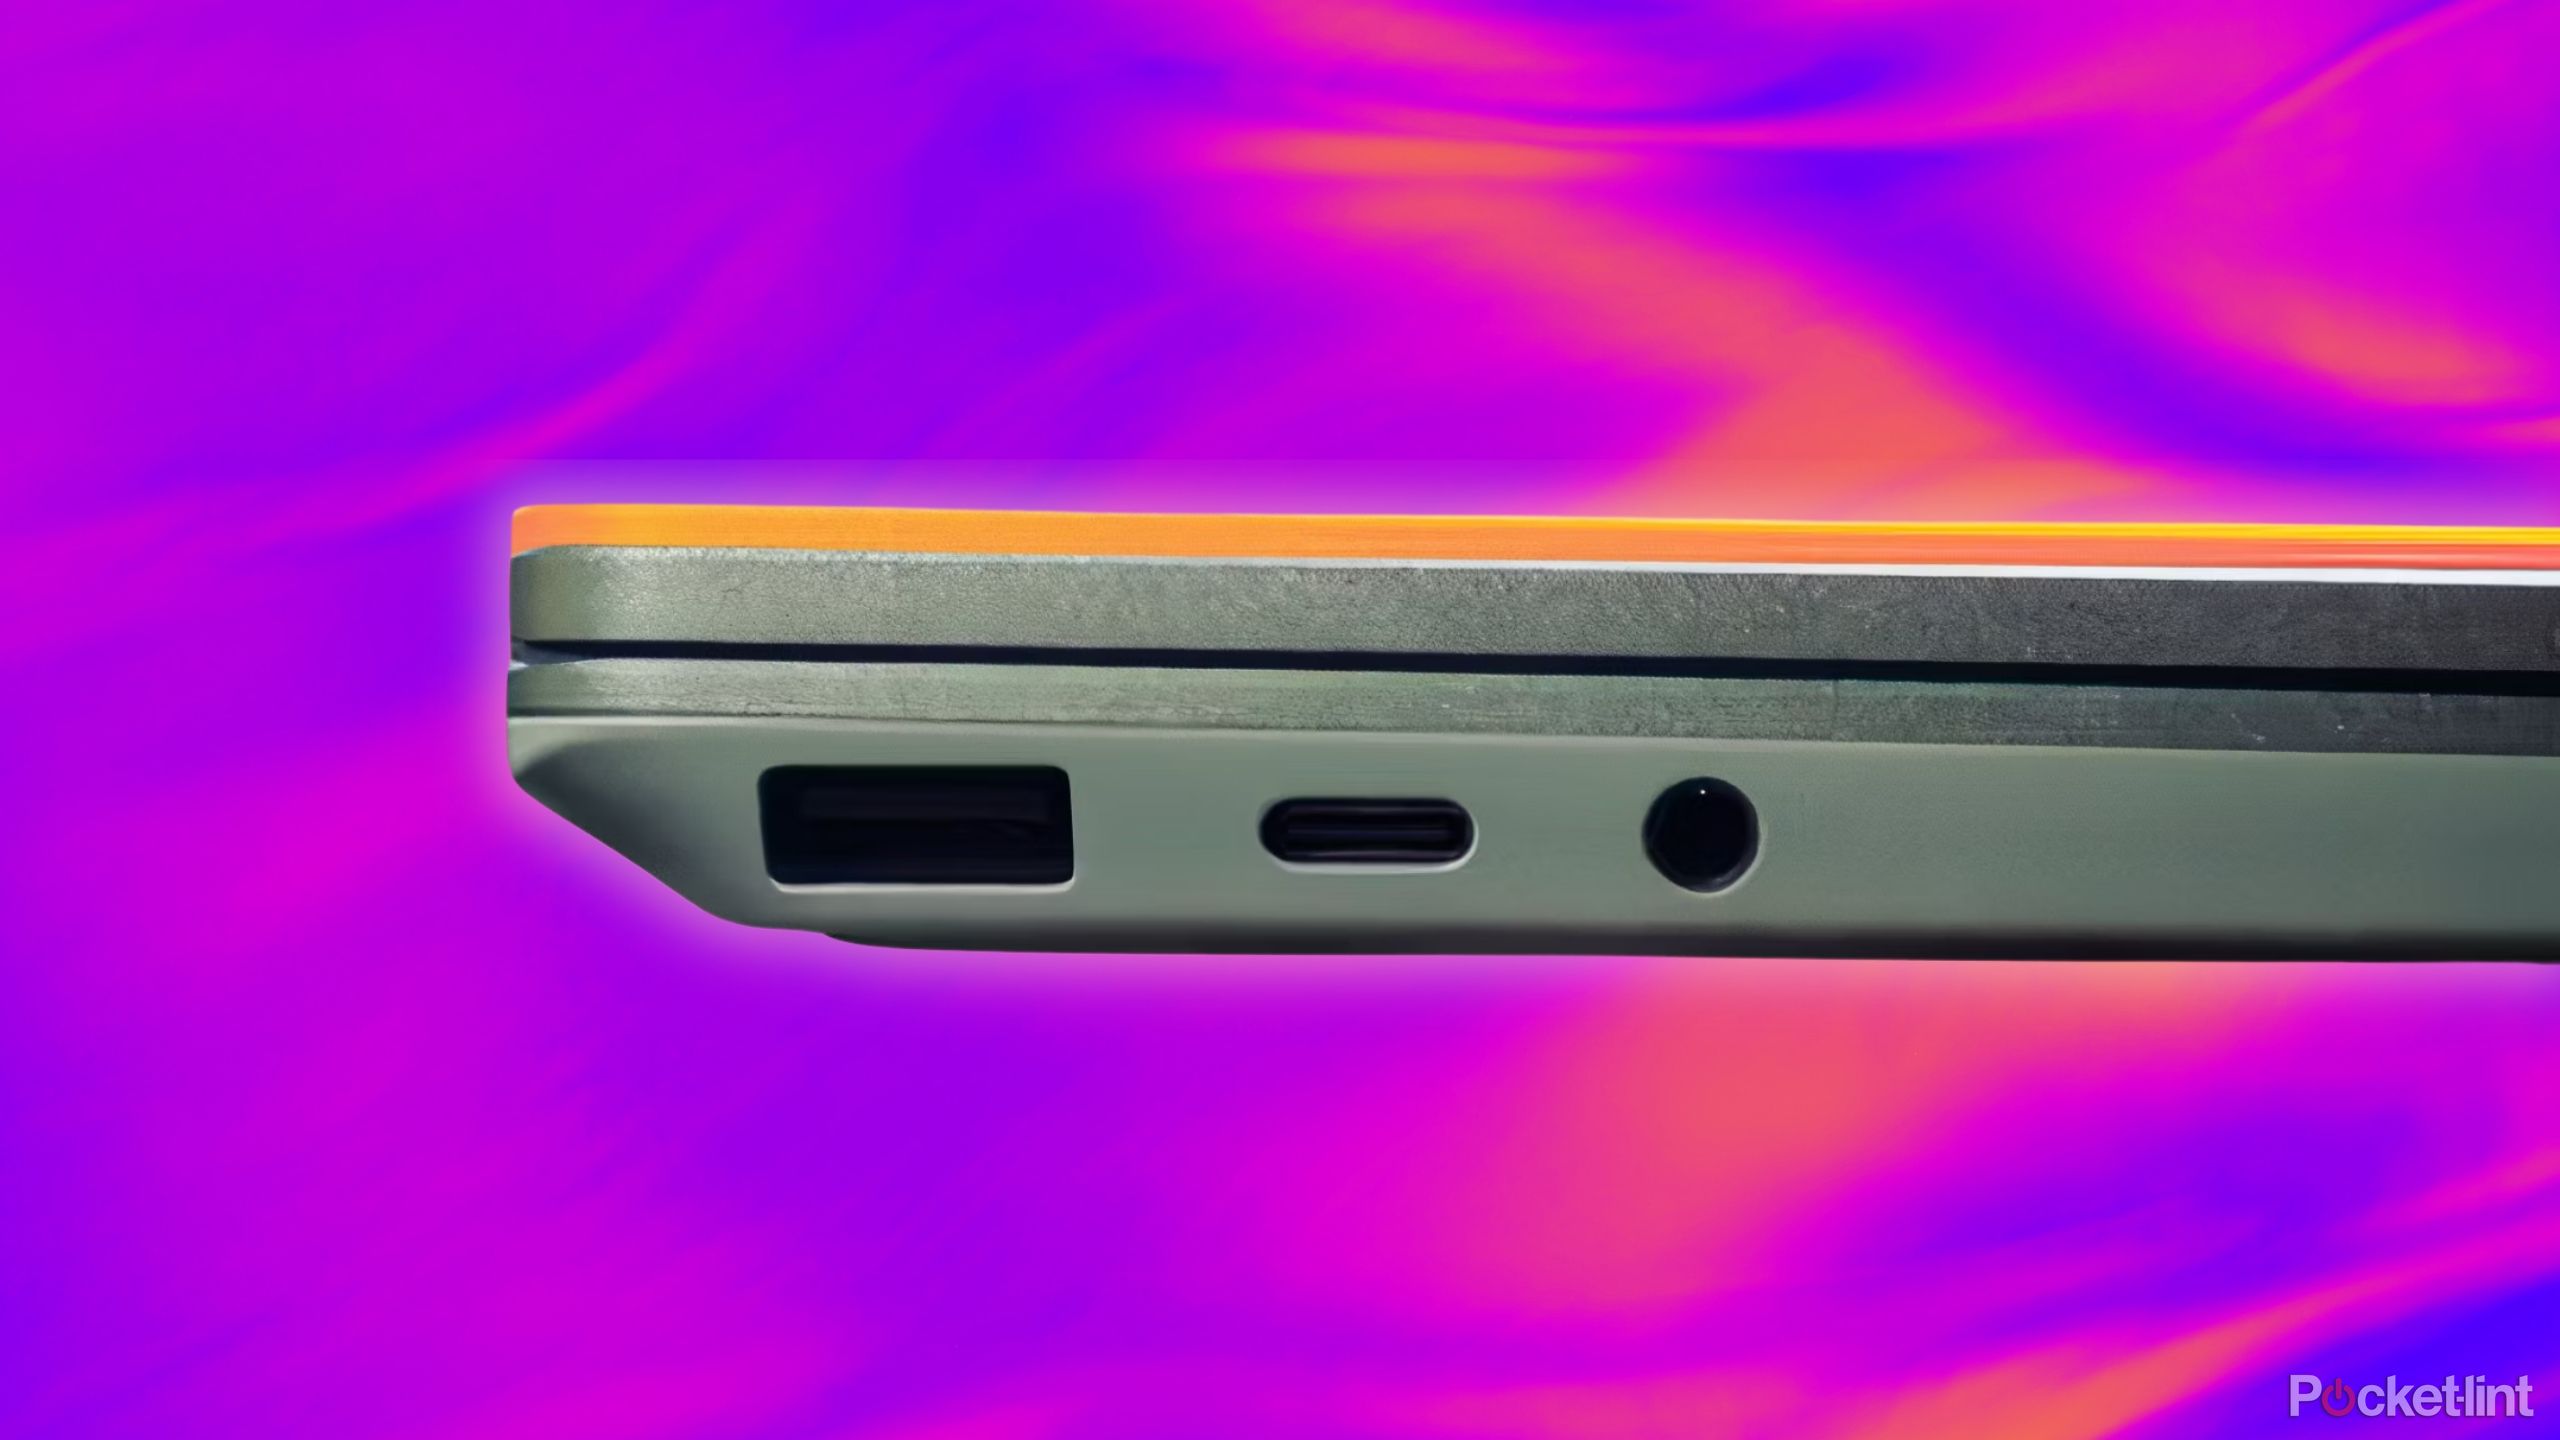 Laptop headphone jack and charging port against a purple and pink and orange background. 